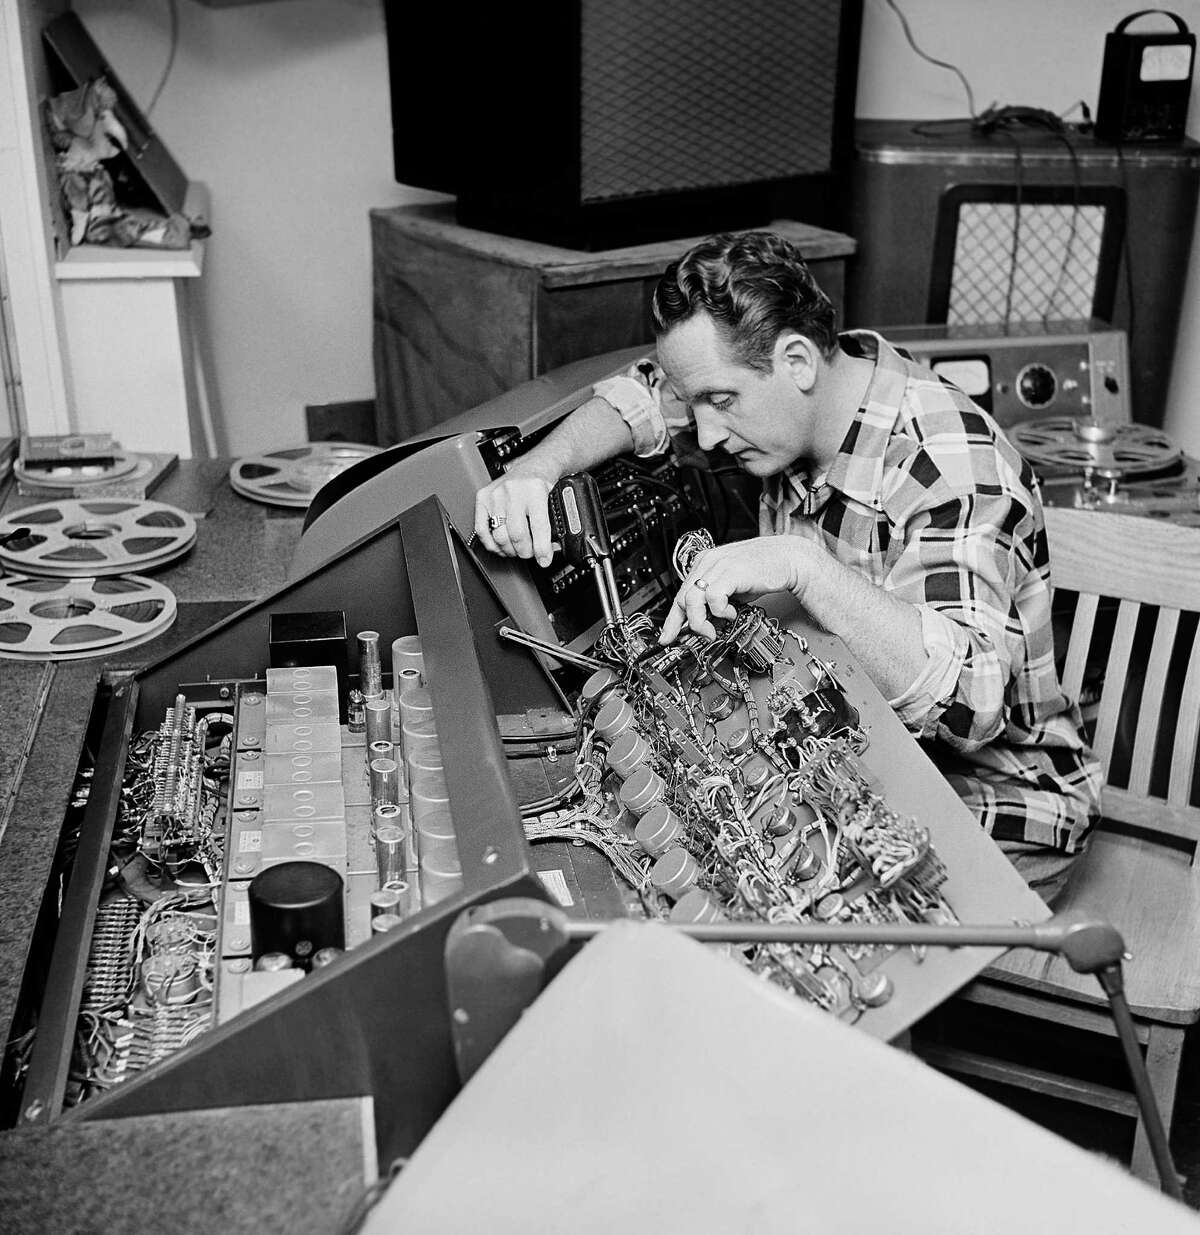 FILE - In this Dec. 20, 1963 file photo, Les Paul repairs one of the many control boards in the control room at his Oakland, N.J., home. Les Paul was a renown musician also known for his innovations on the solid body electric guitar and multitrack recording. The man who helped pave the way for rock 'n' roll is finally getting a permanent exhibit on June 9, 2013 at the Waukesha County Museum in his Wisconsin hometown. (AP Photo/Dan Grossi, file)